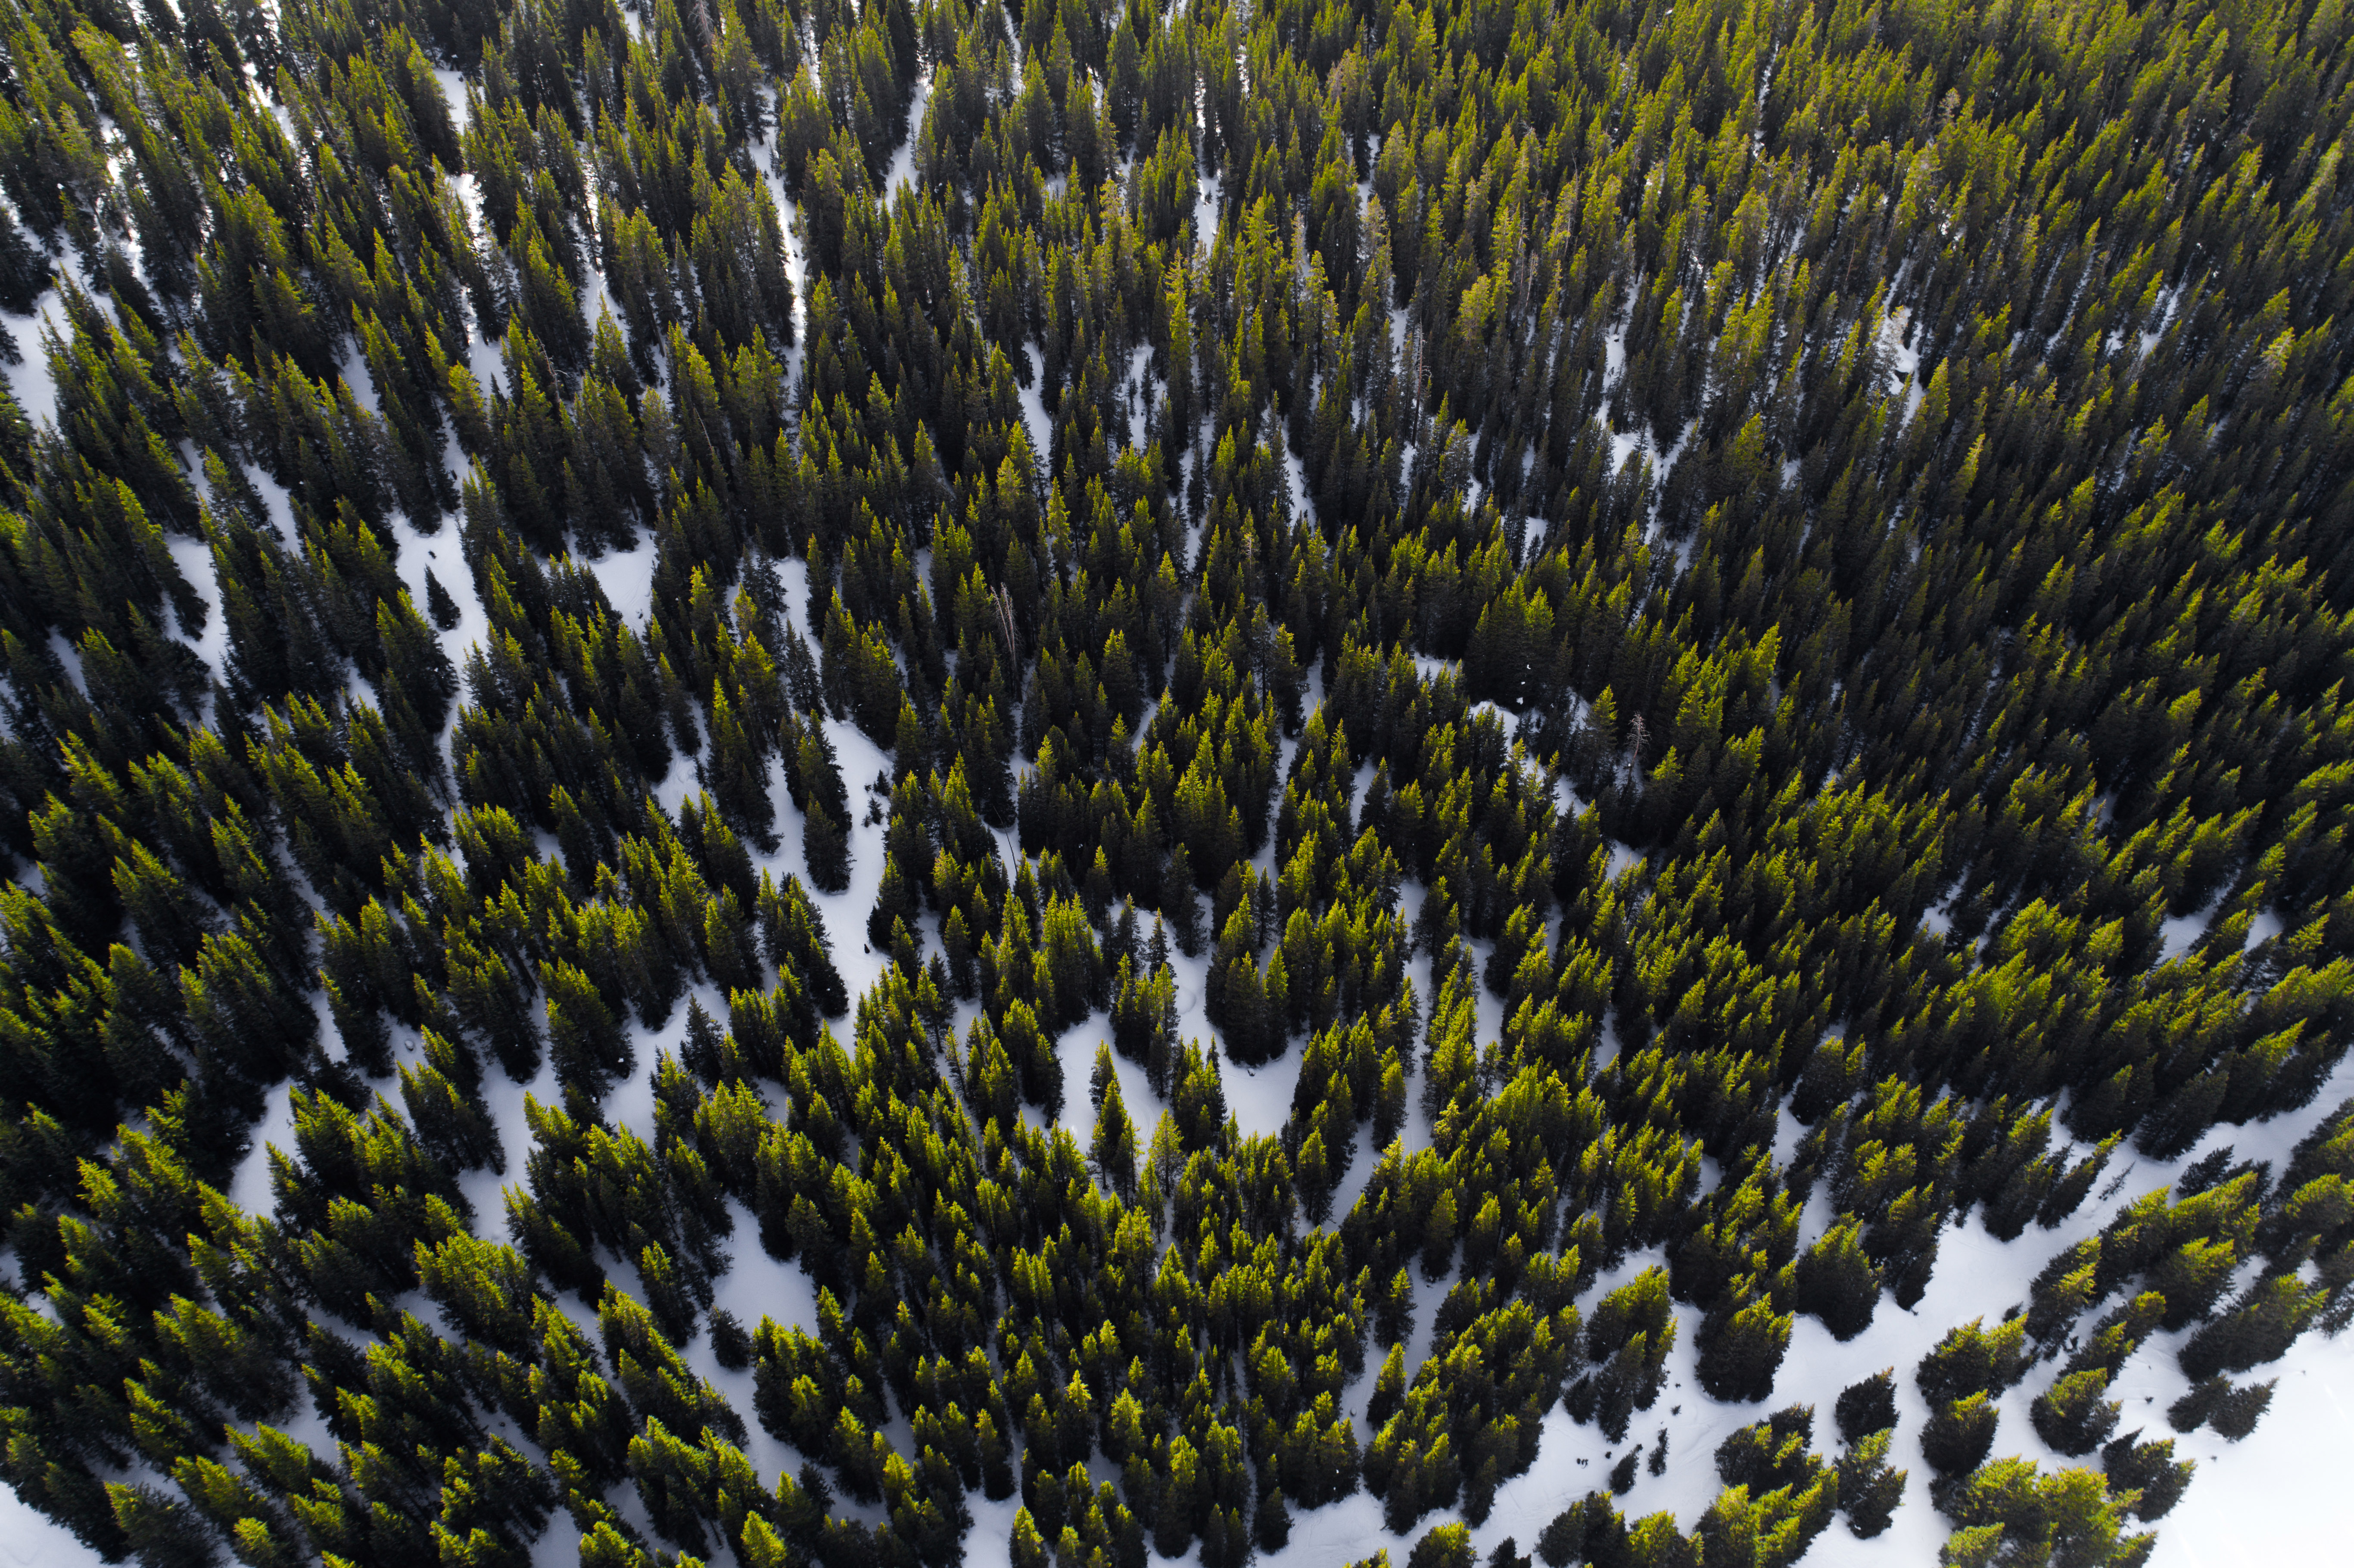 General 5464x3640 aerial view blurred cold conifer growth angle landscape nature outdoors pattern snow seasons texture